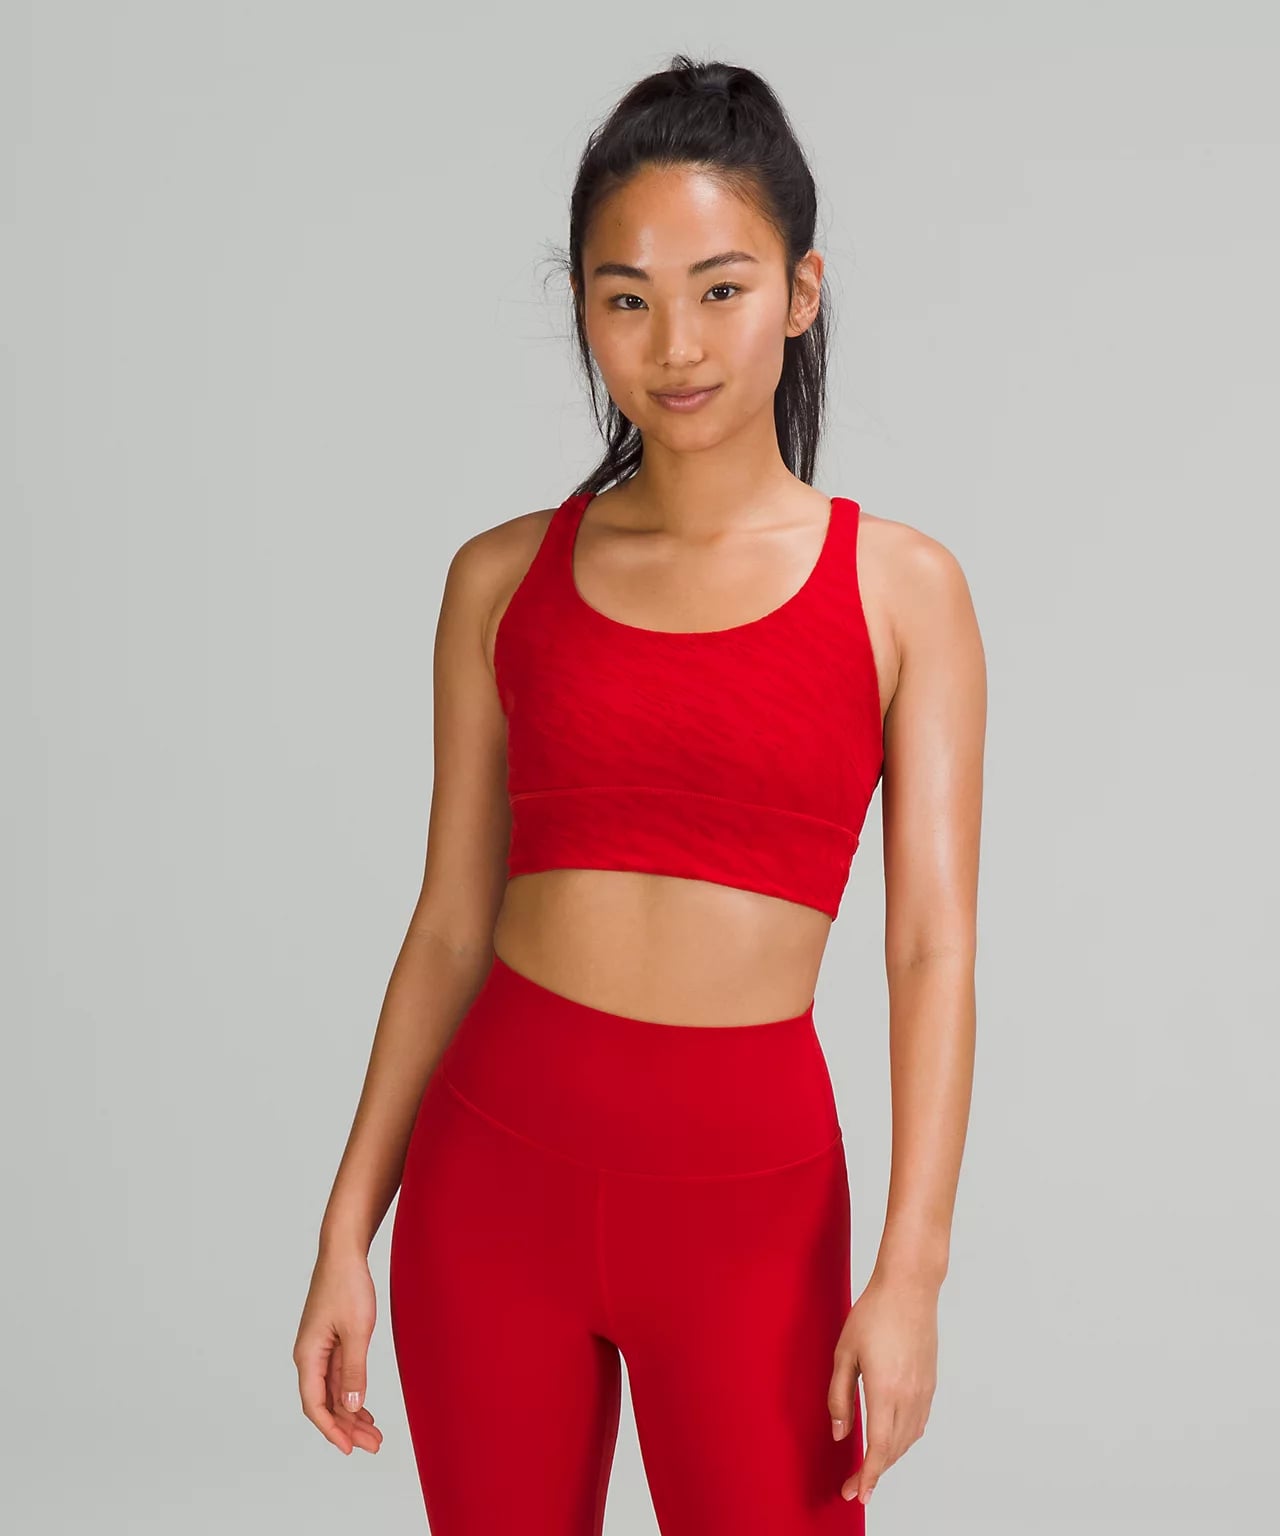 Lululemon's Lunar New Year Collection Isn't Afraid To Bring The Heat